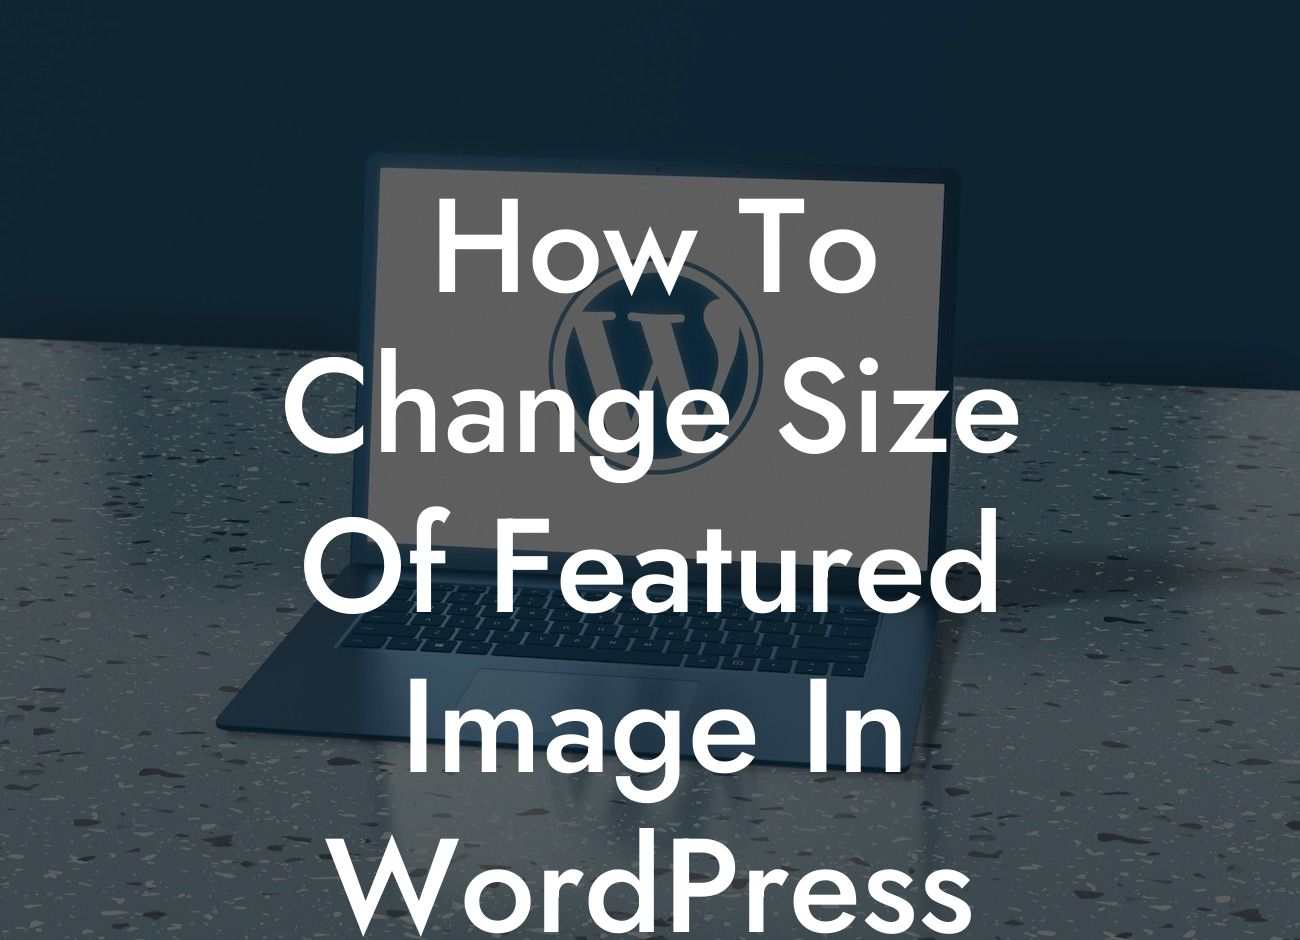 How To Change Size Of Featured Image In WordPress